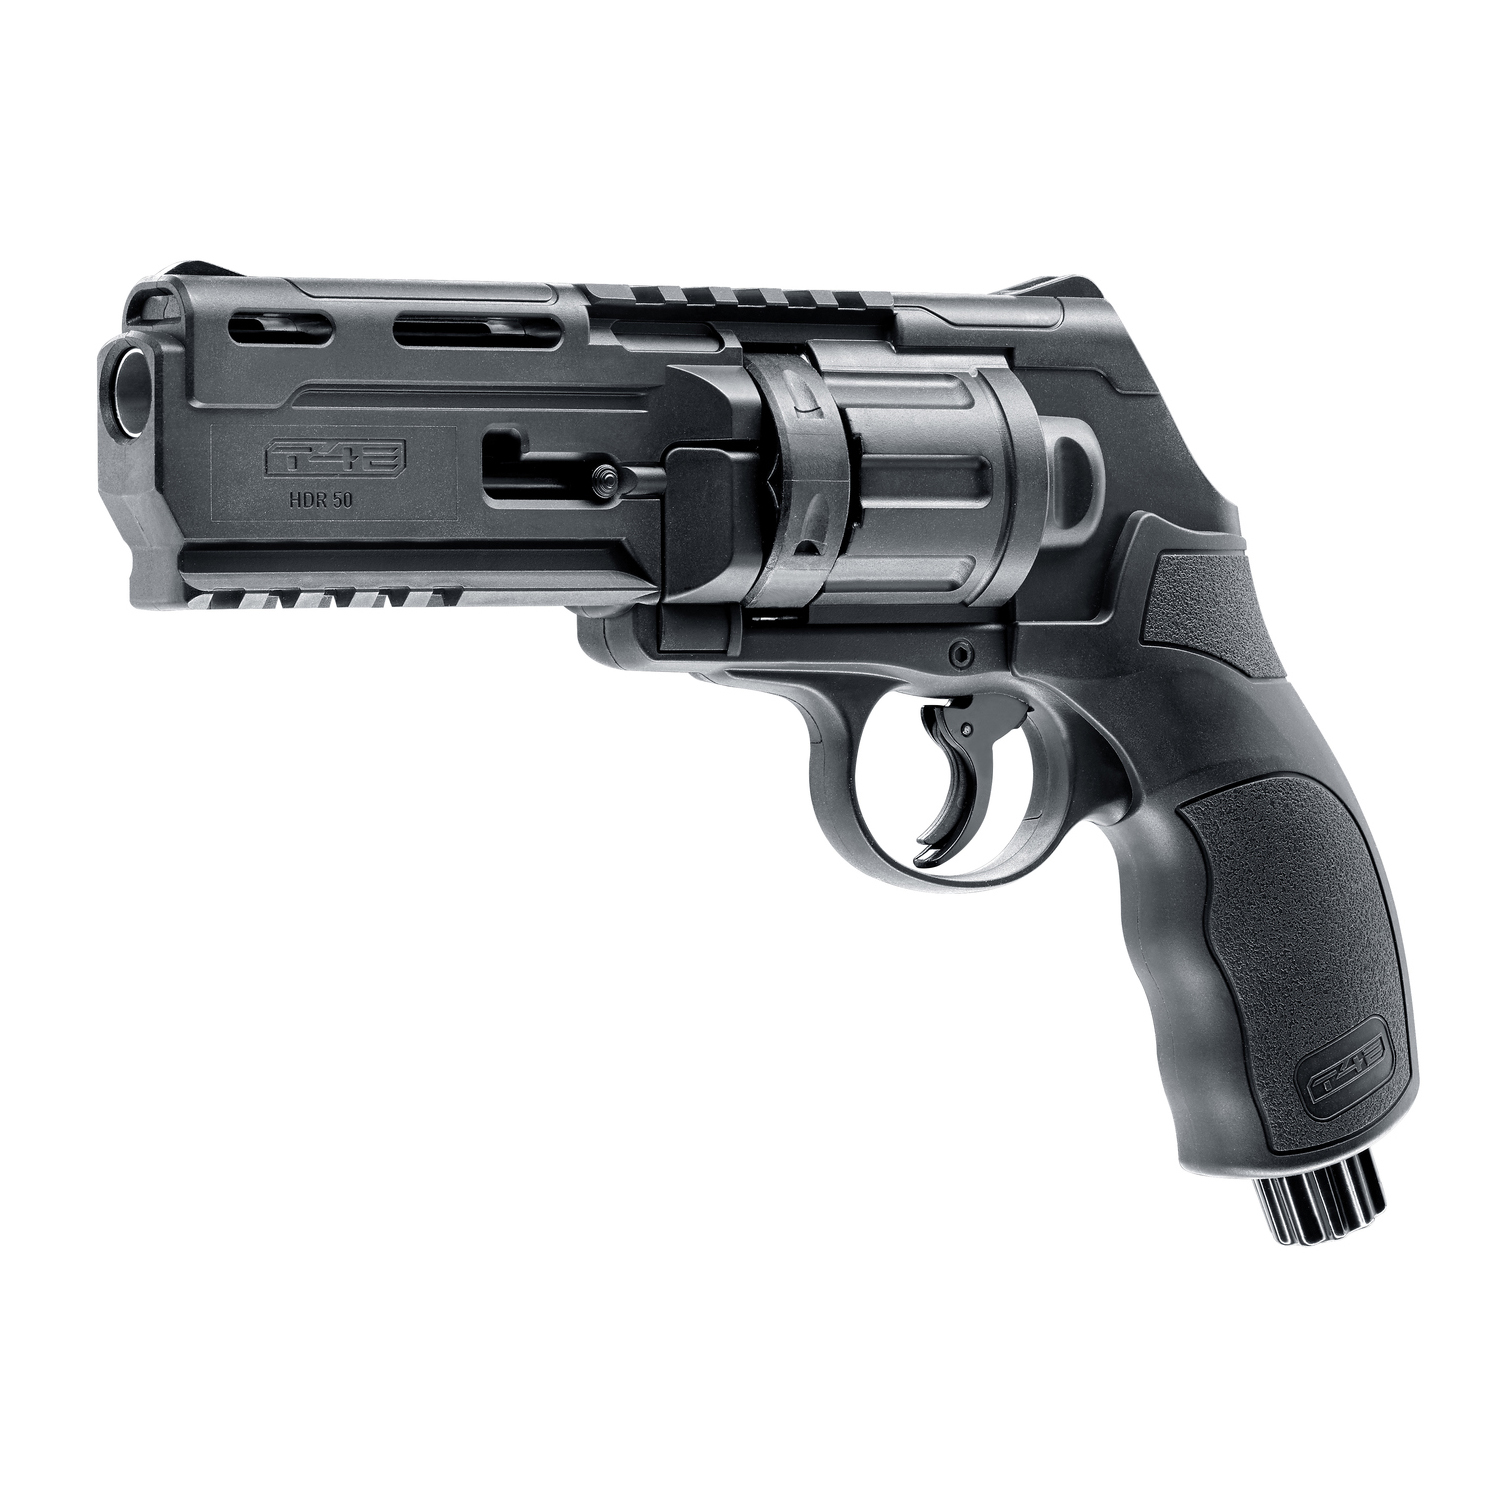 Umarex T4E HDR 50 - "Hellboy" Paintball Revolver.